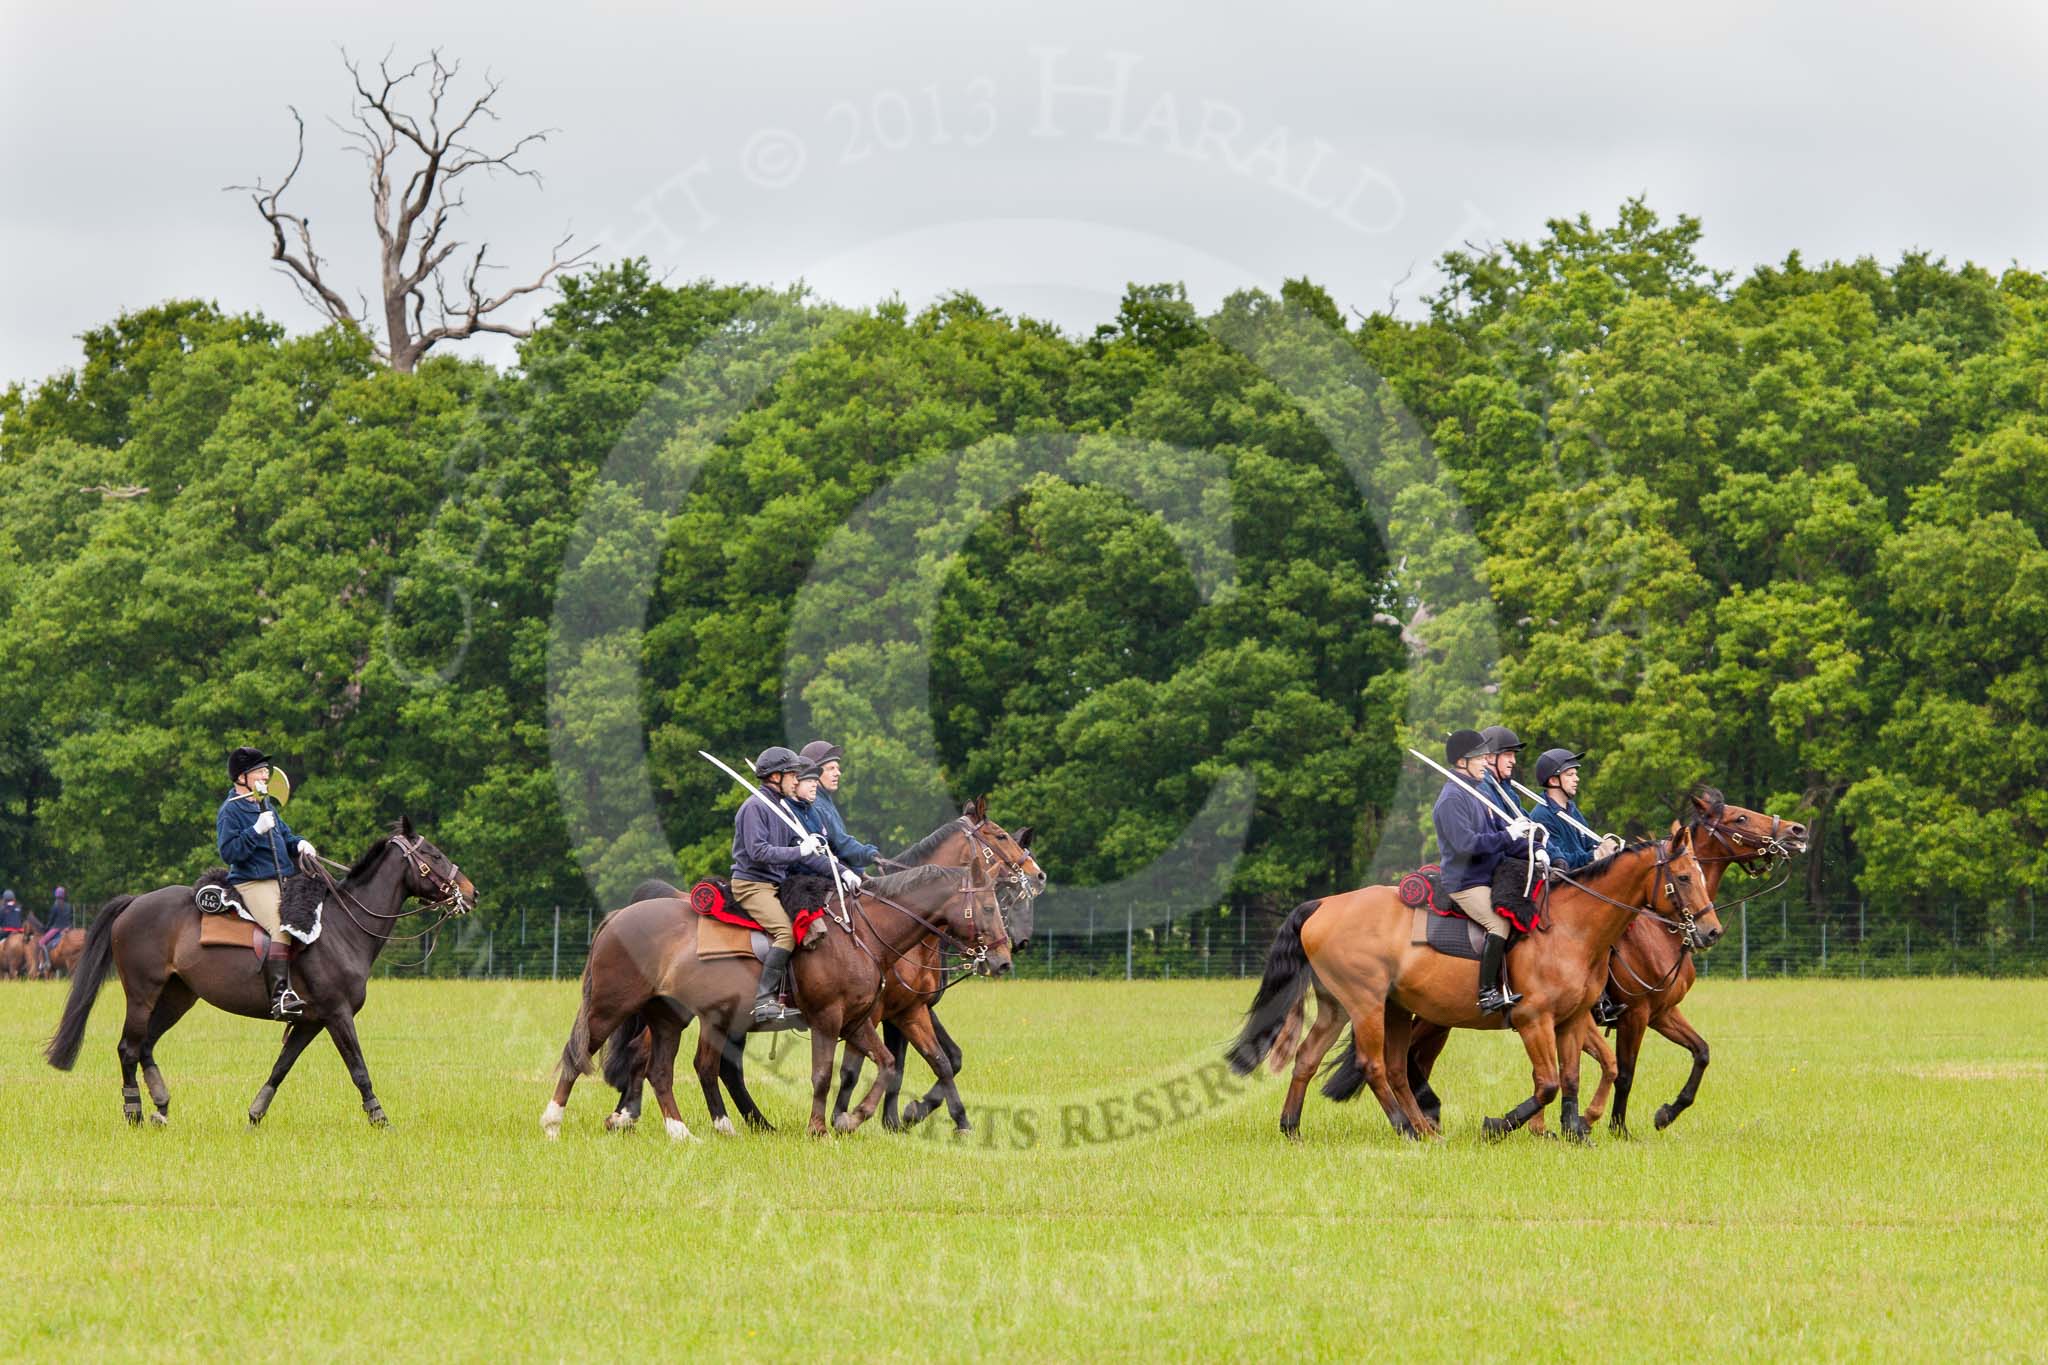 The Light Cavalry HAC Annual Review and Inspection 2013.
Windsor Great Park Review Ground,
Windsor,
Berkshire,
United Kingdom,
on 09 June 2013 at 10:52, image #99